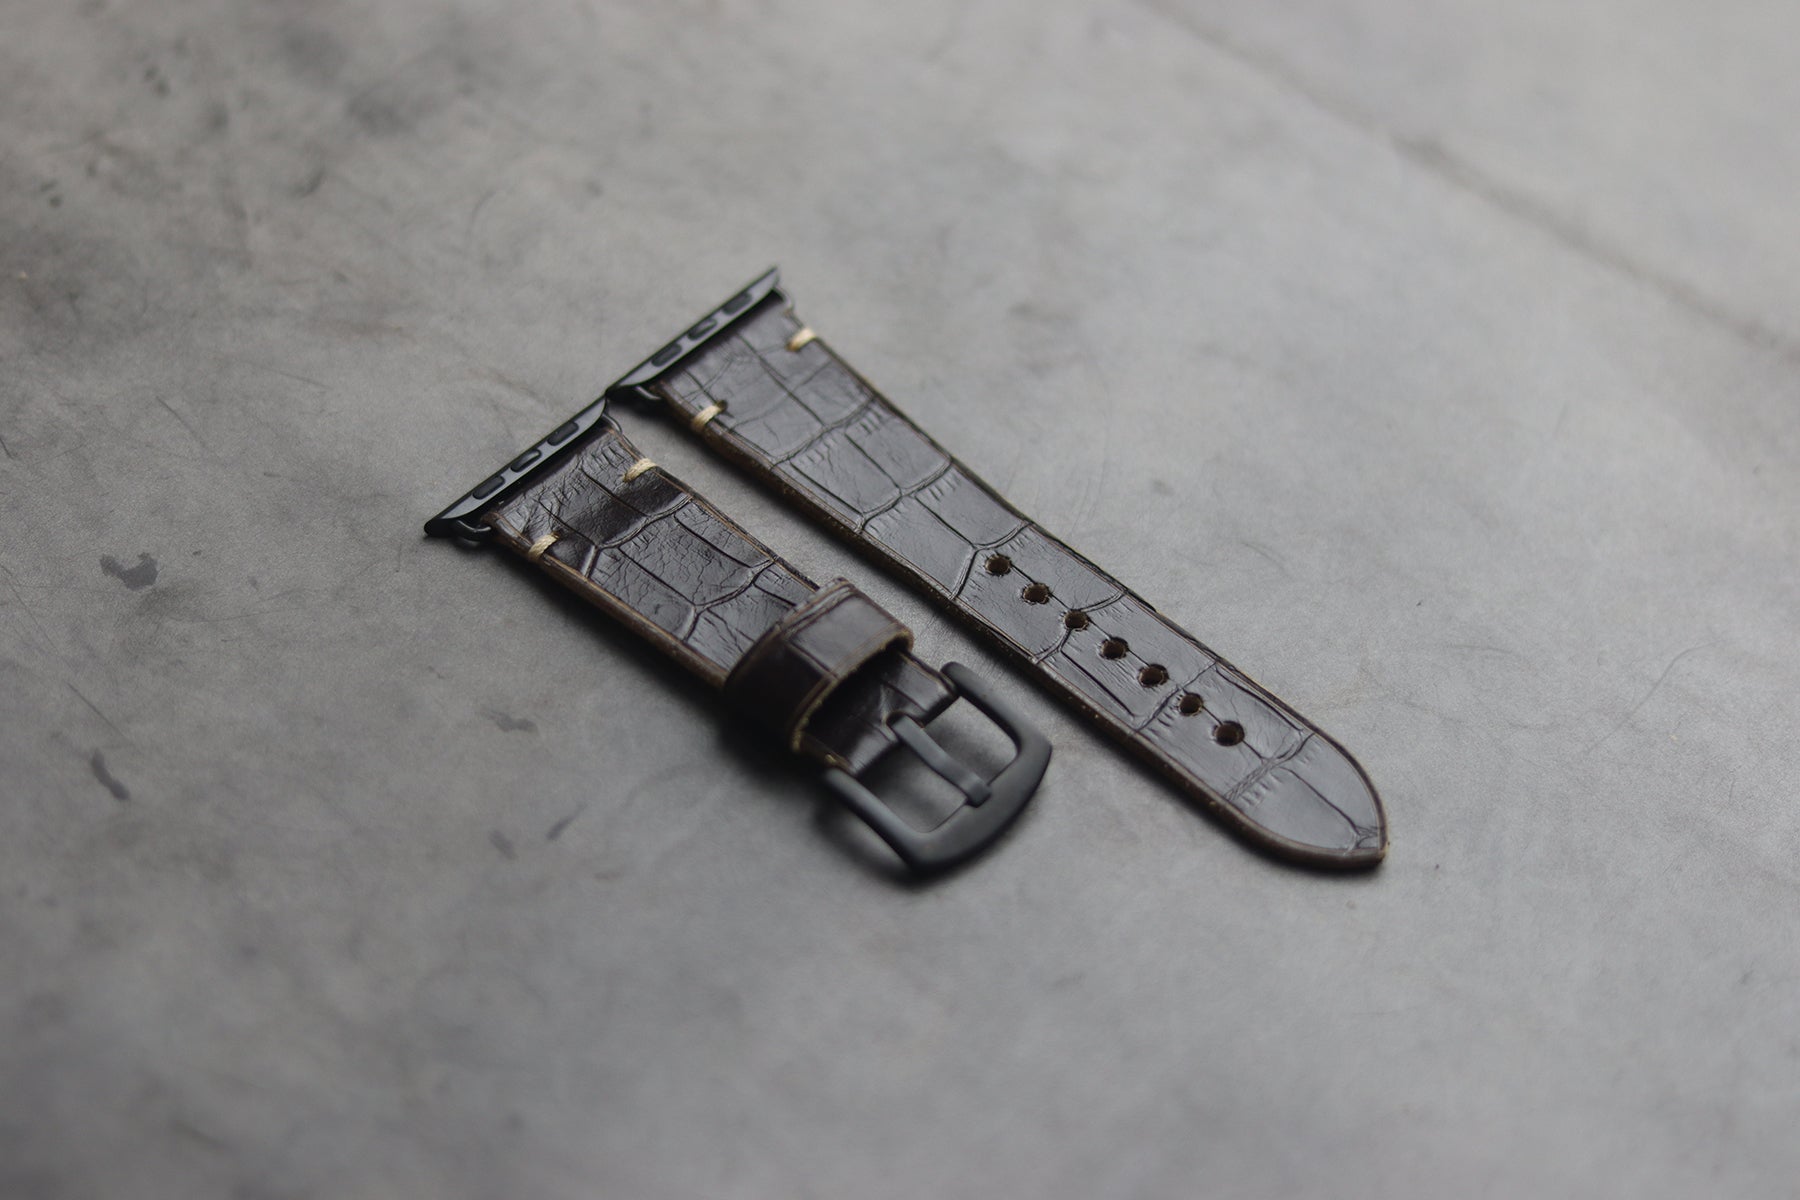 BROWN CROCO HAND-CRAFTED APPLE WATCH STRAPS